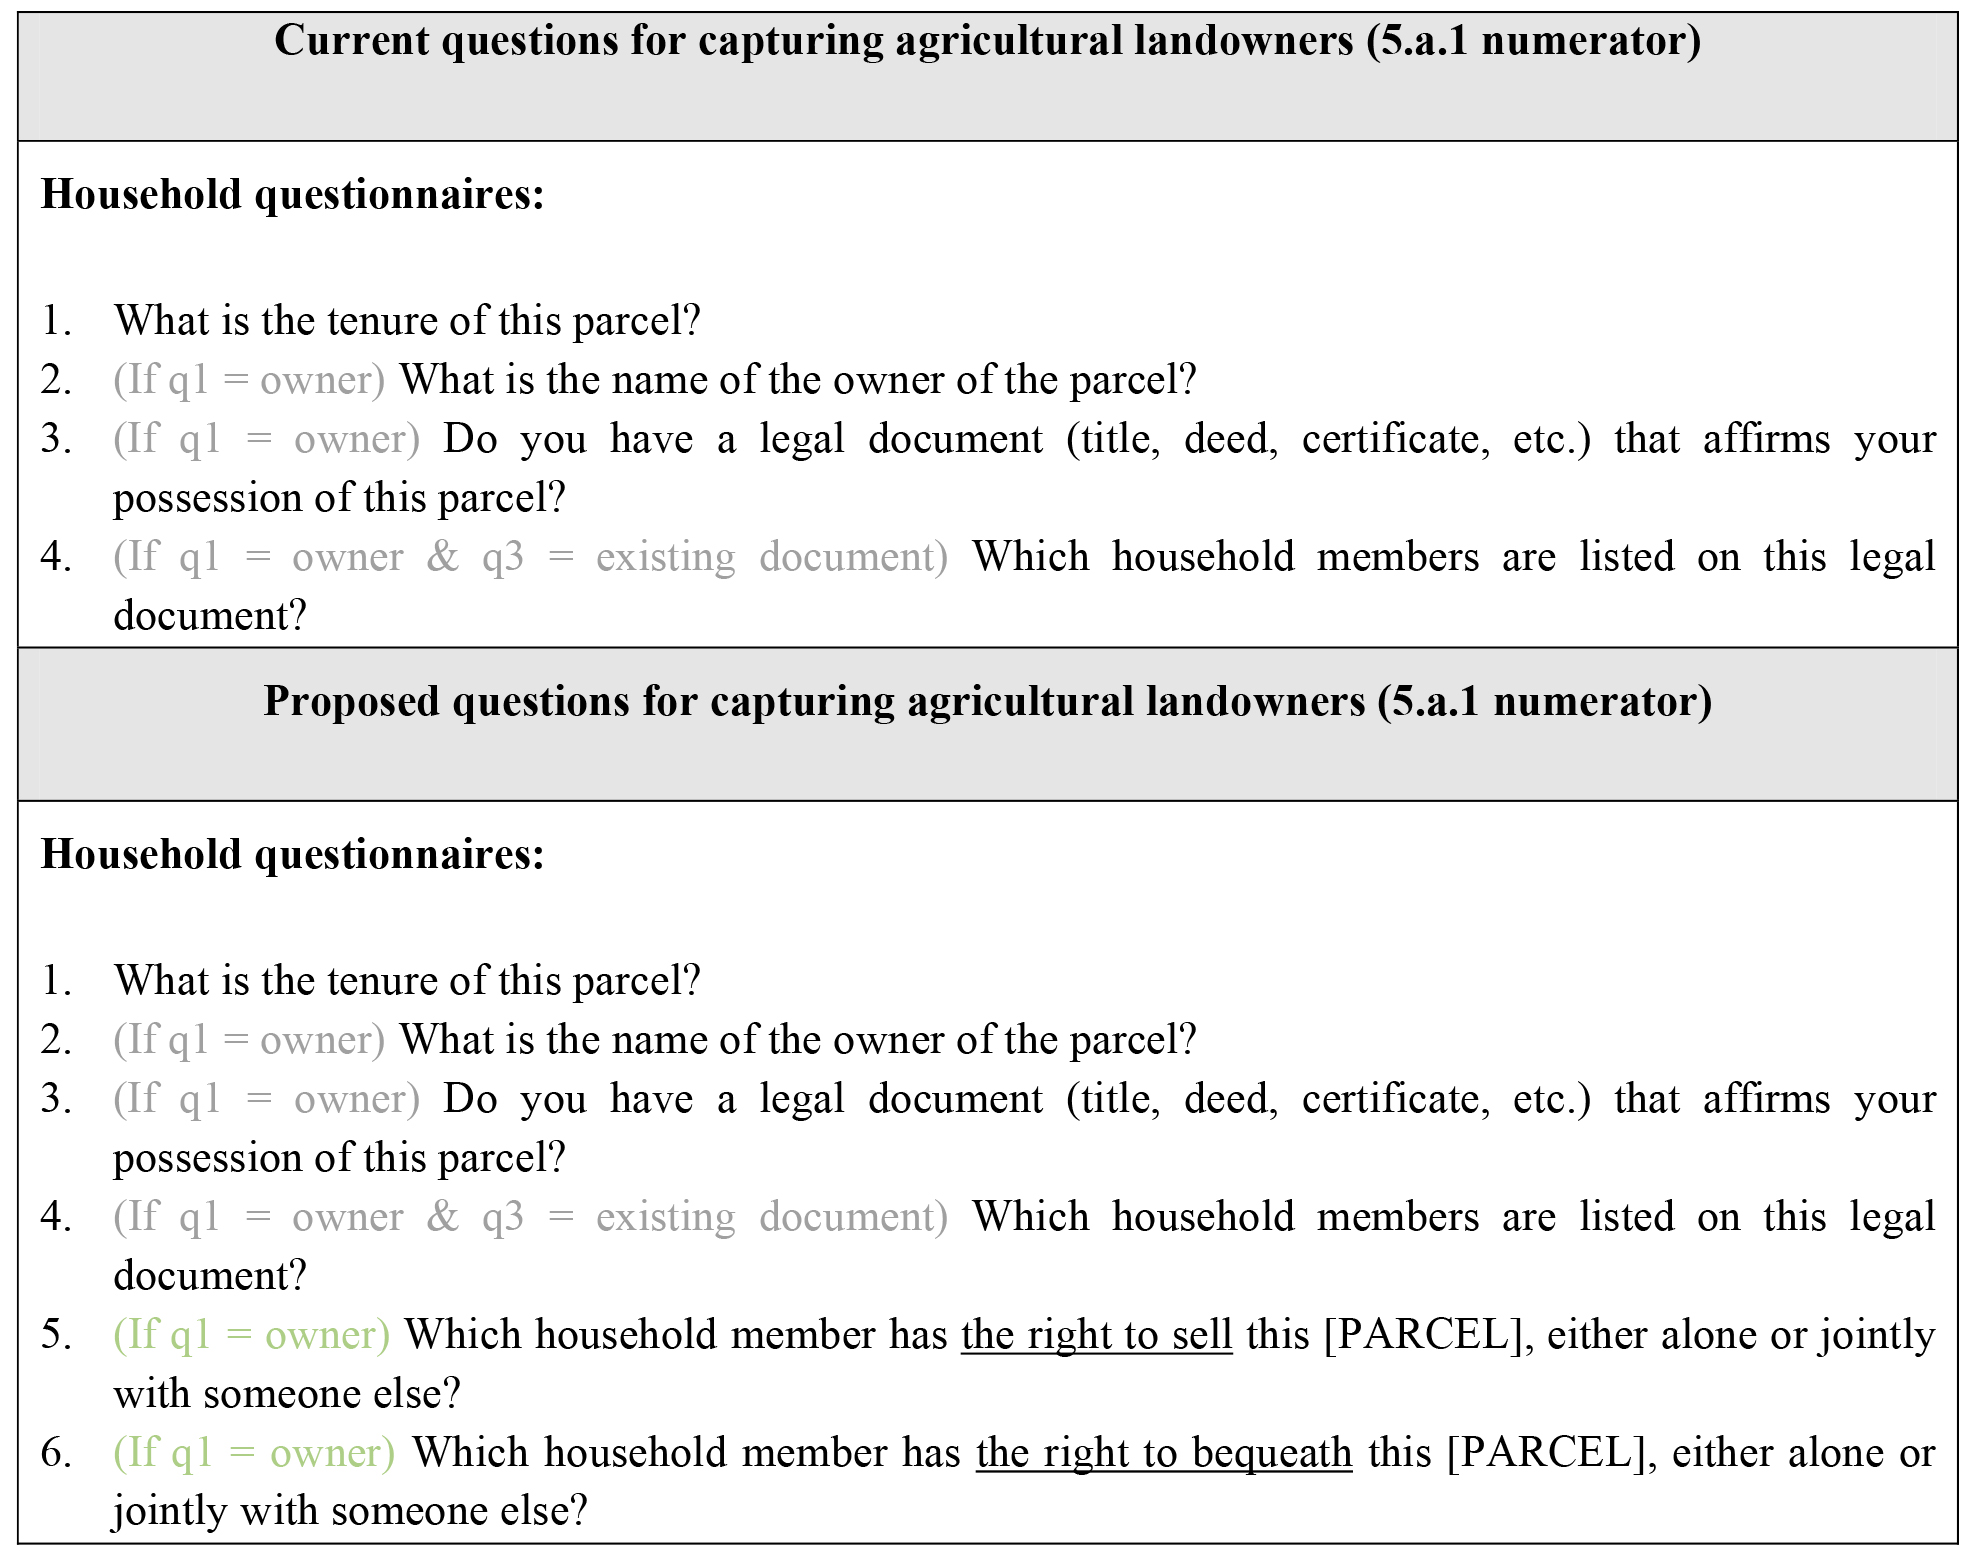 Proposal for improving questions capturing land ownership in EHCVM surveys according to 5.a.1 definitions.